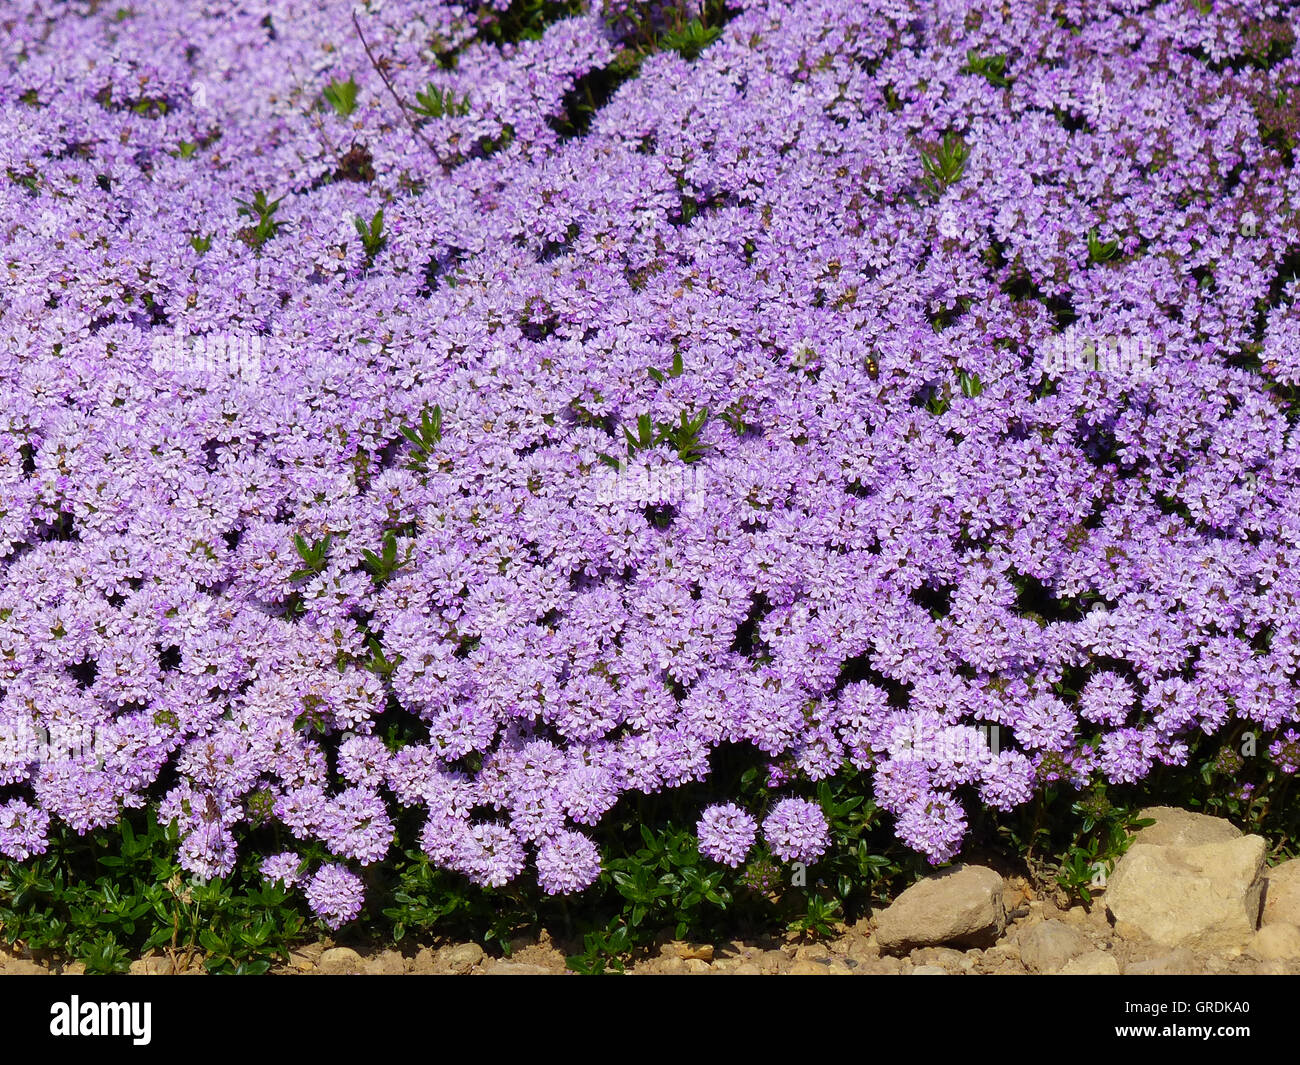 Violet Blooming Creeping Thyme Stock Photo